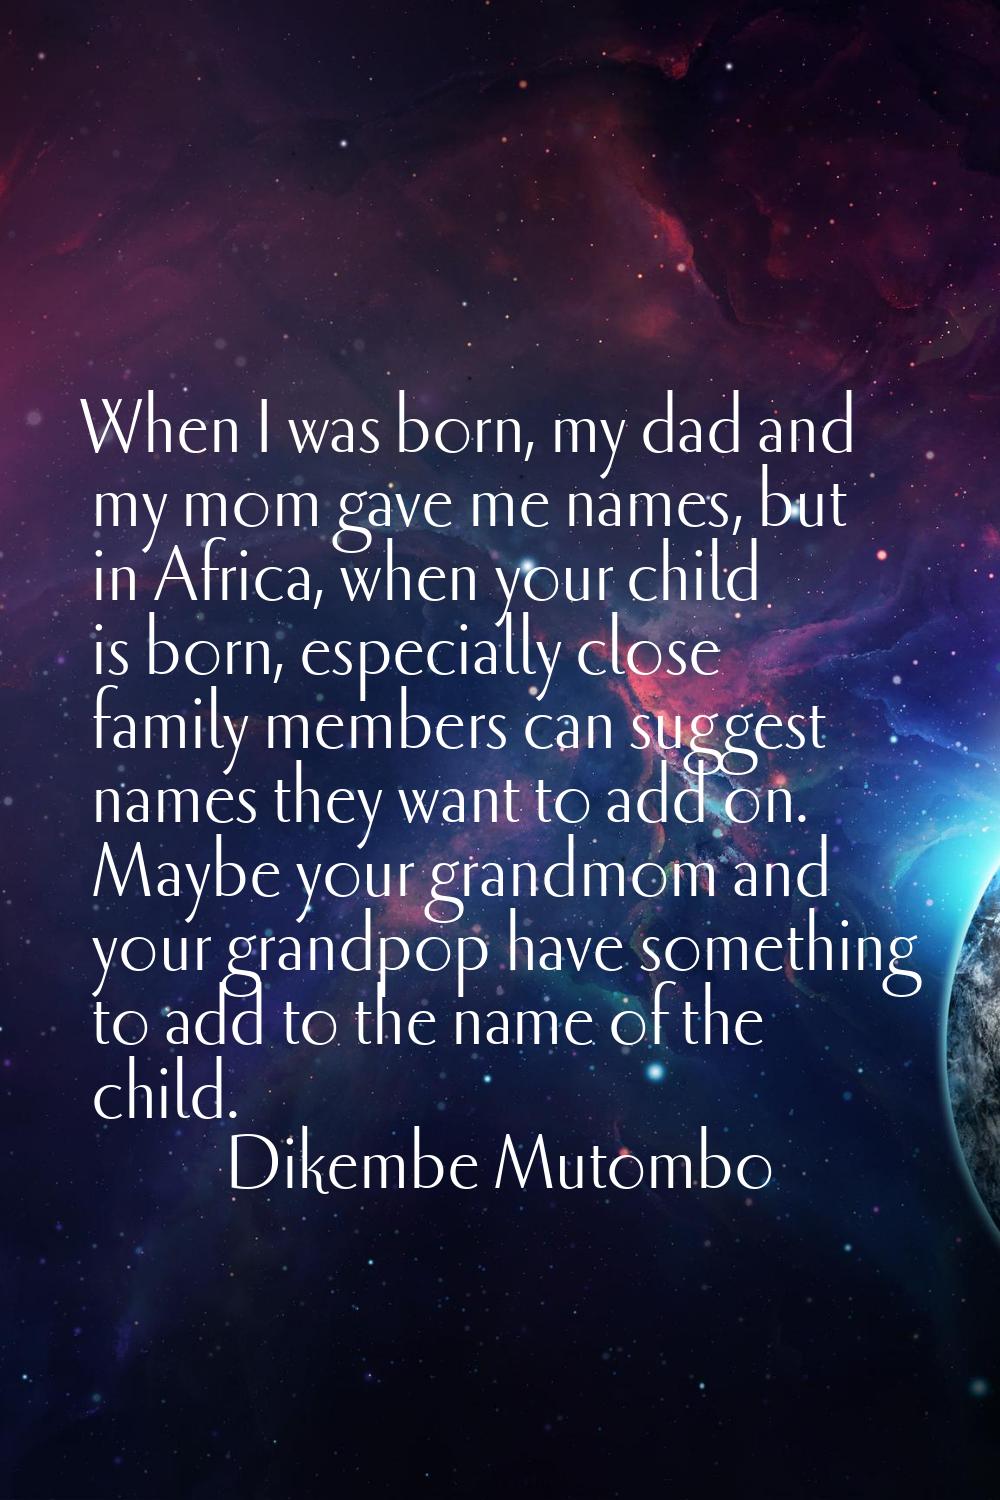 When I was born, my dad and my mom gave me names, but in Africa, when your child is born, especiall